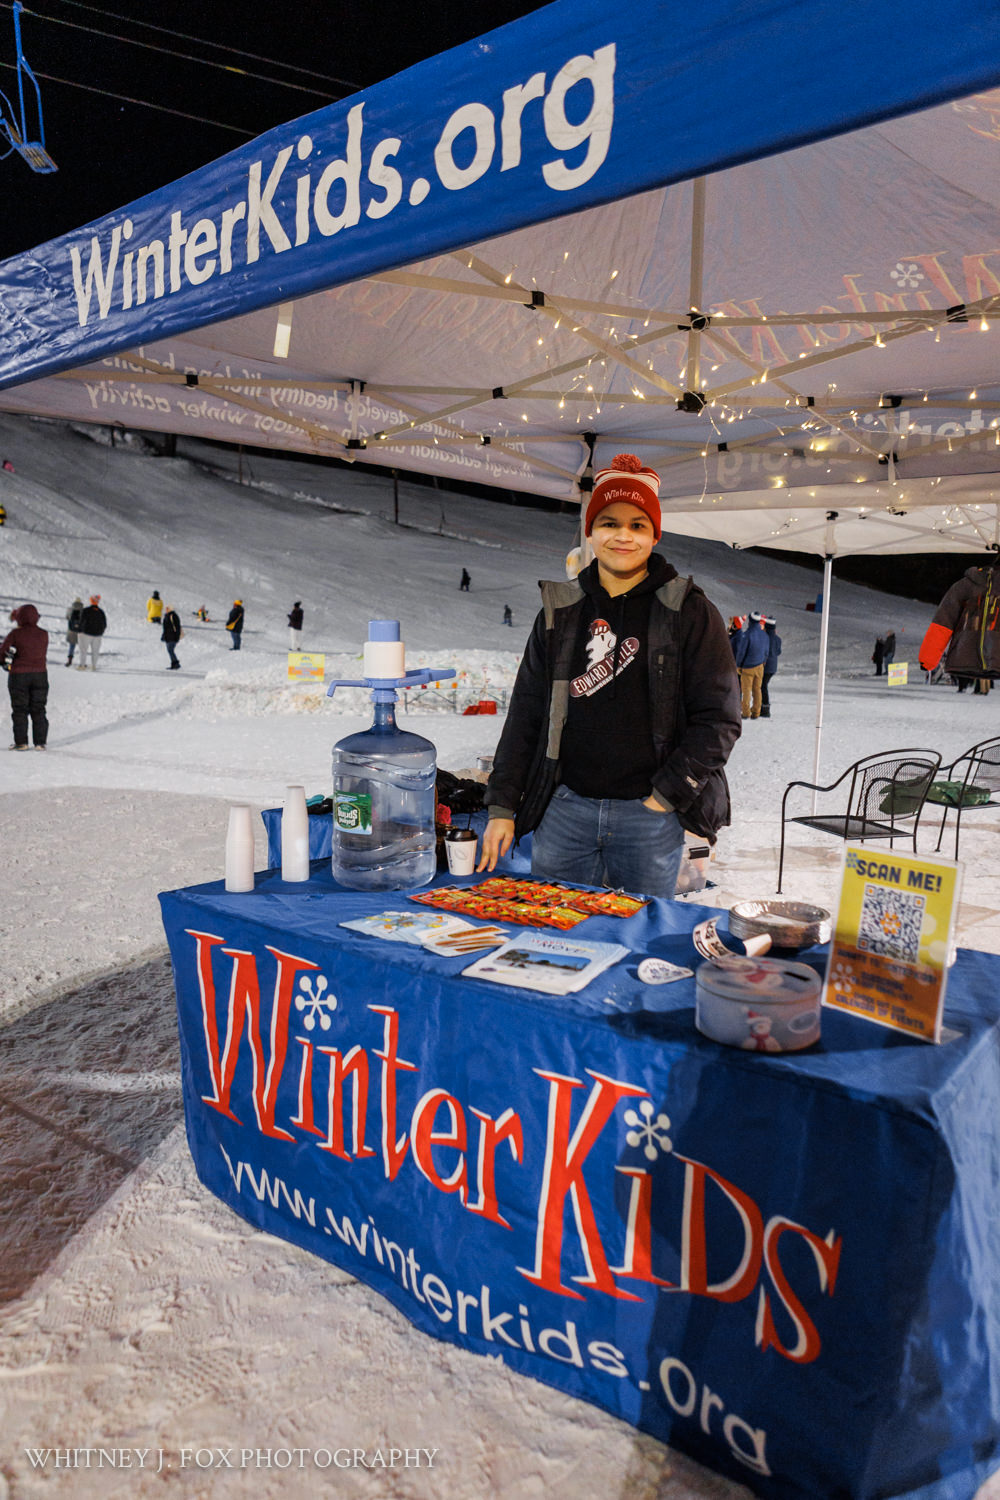 222 winter kids welcome to winter 2022 lost valley auburn maine documentary event photographer whitney j fox 3598 w